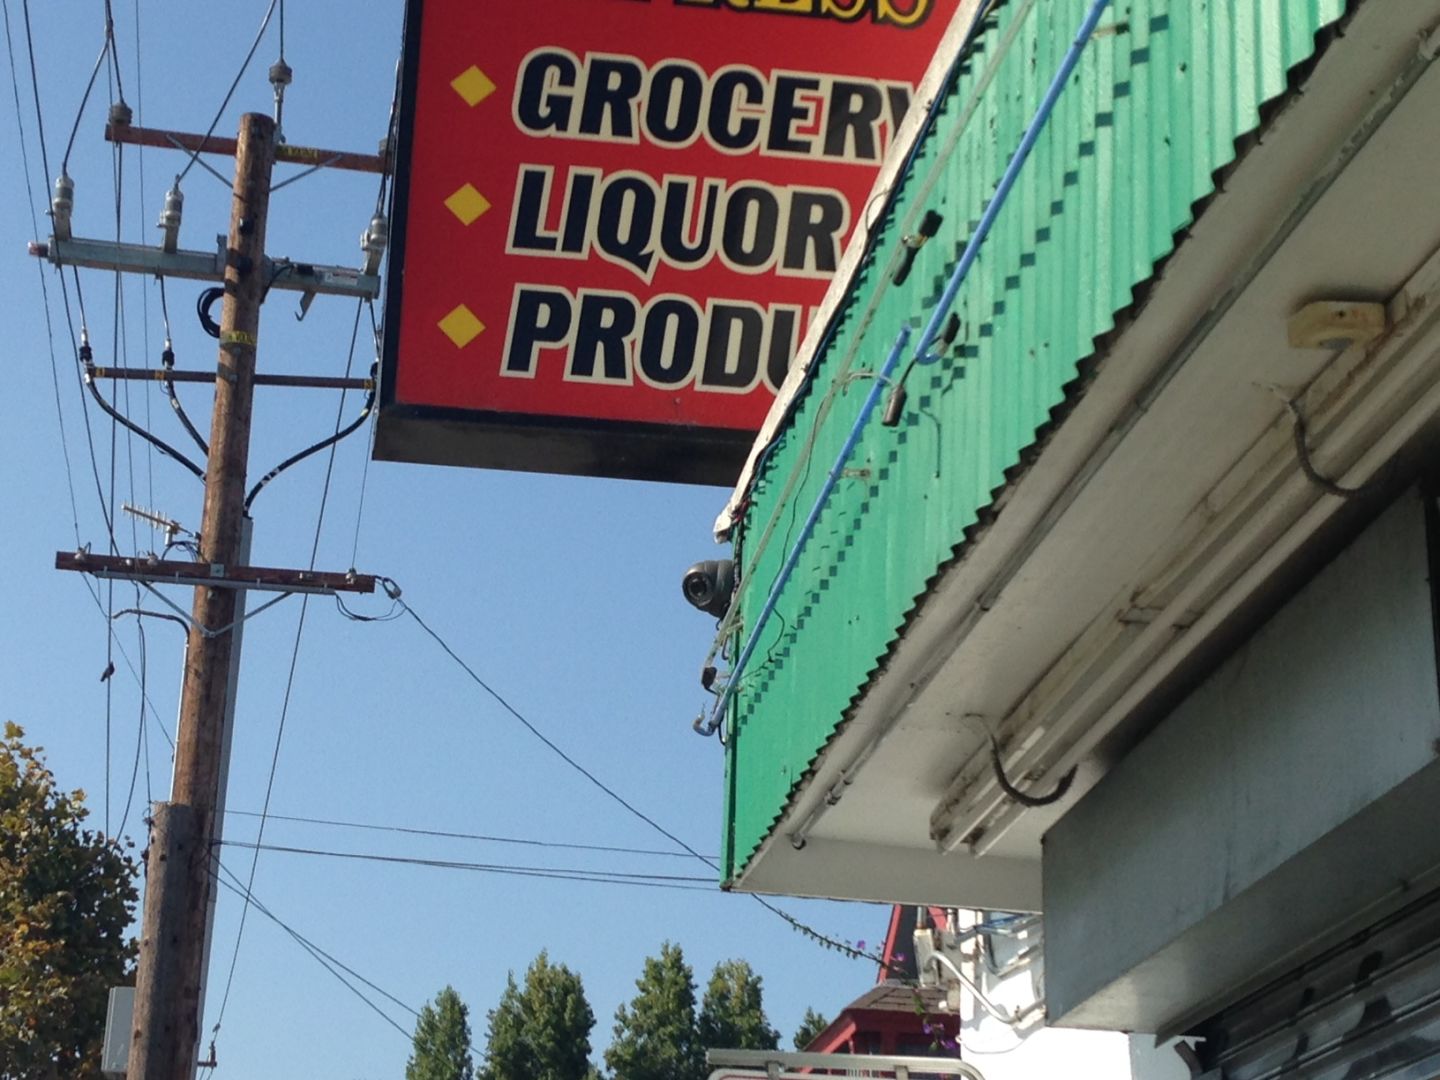 For decades, West Oakland residents have made do without a major chain grocery. Corner markets and liquor stores are the main local source for groceries.